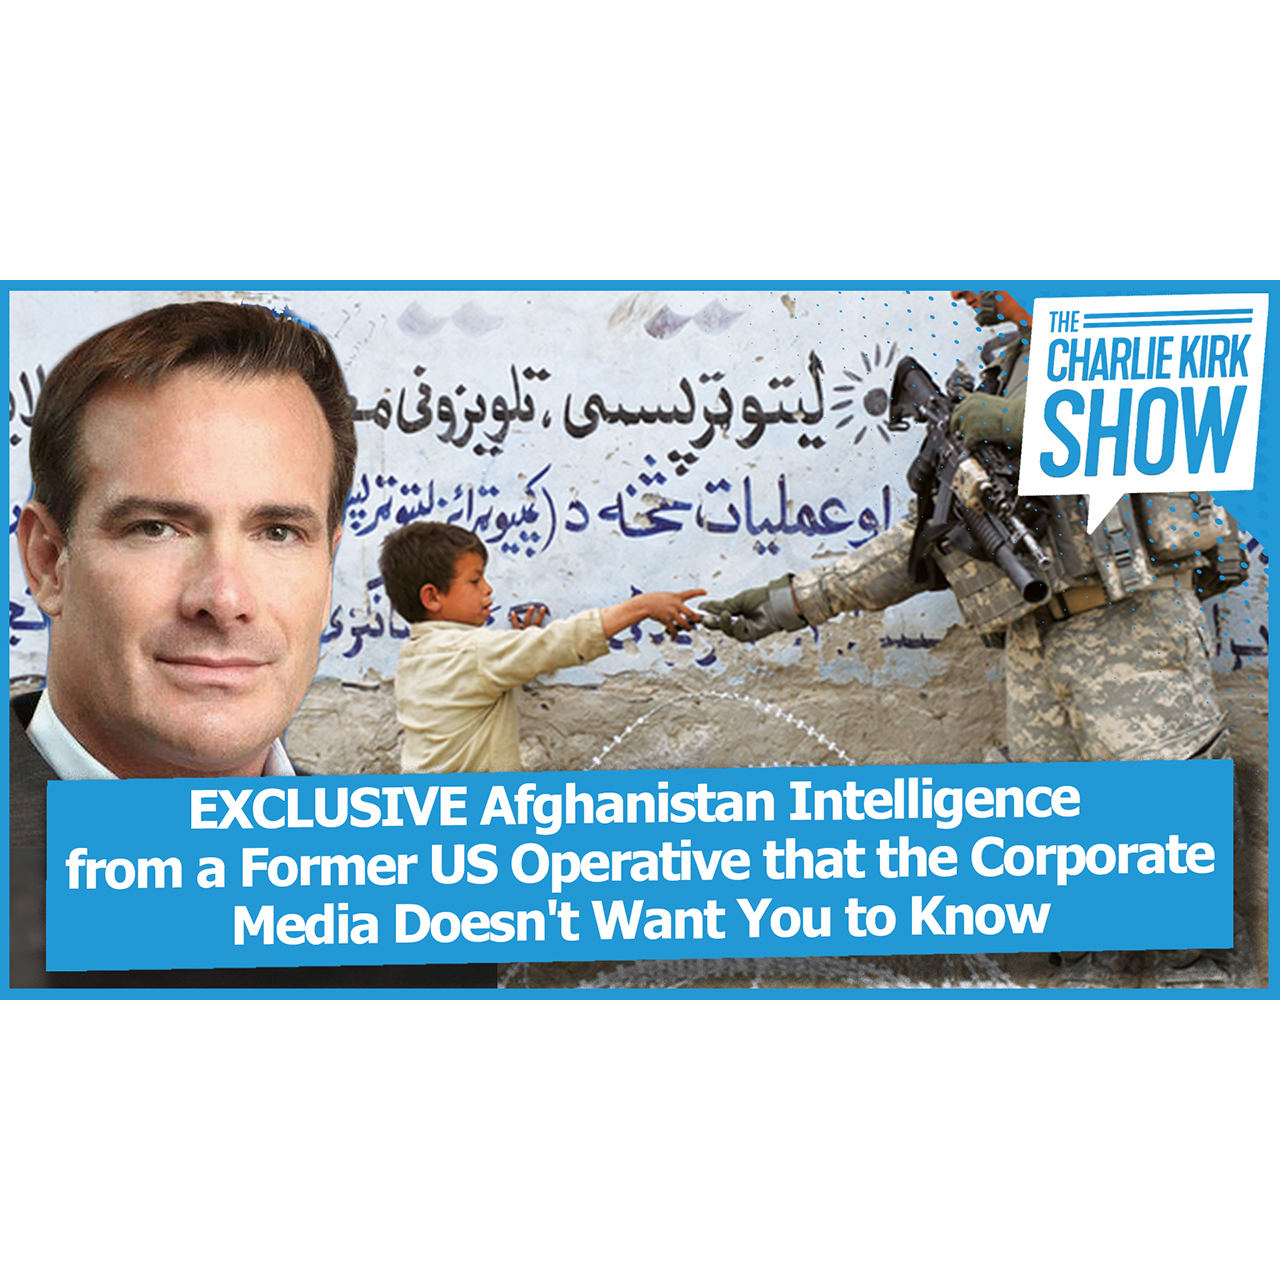 EXCLUSIVE Afghanistan Intelligence from a Former US Operative that the Corporate Media Doesn't Want You to Know